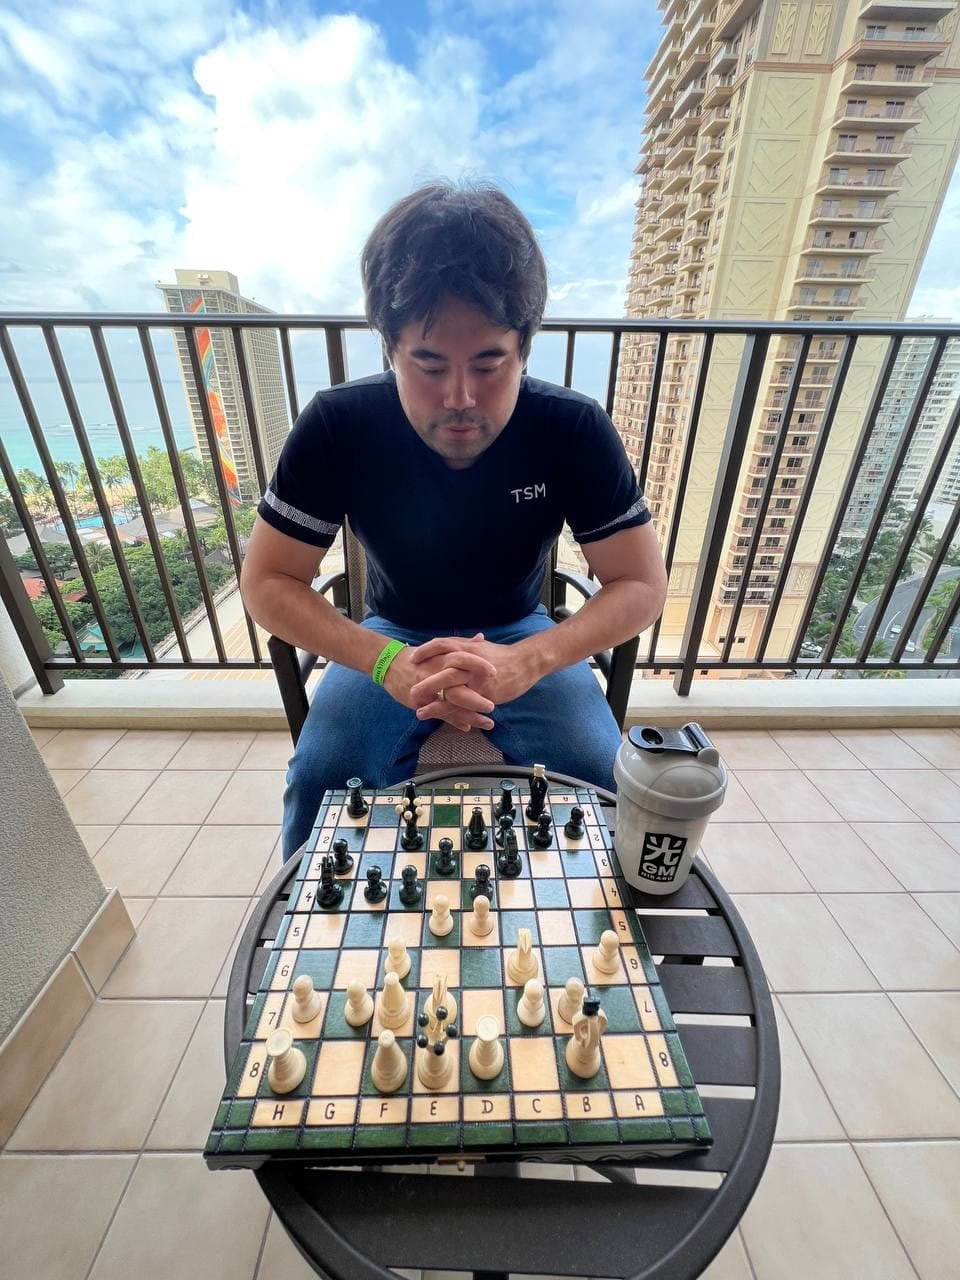 Guess the elo in this picture 💀 #hikarunakamura #hikaru #sigmamale #g